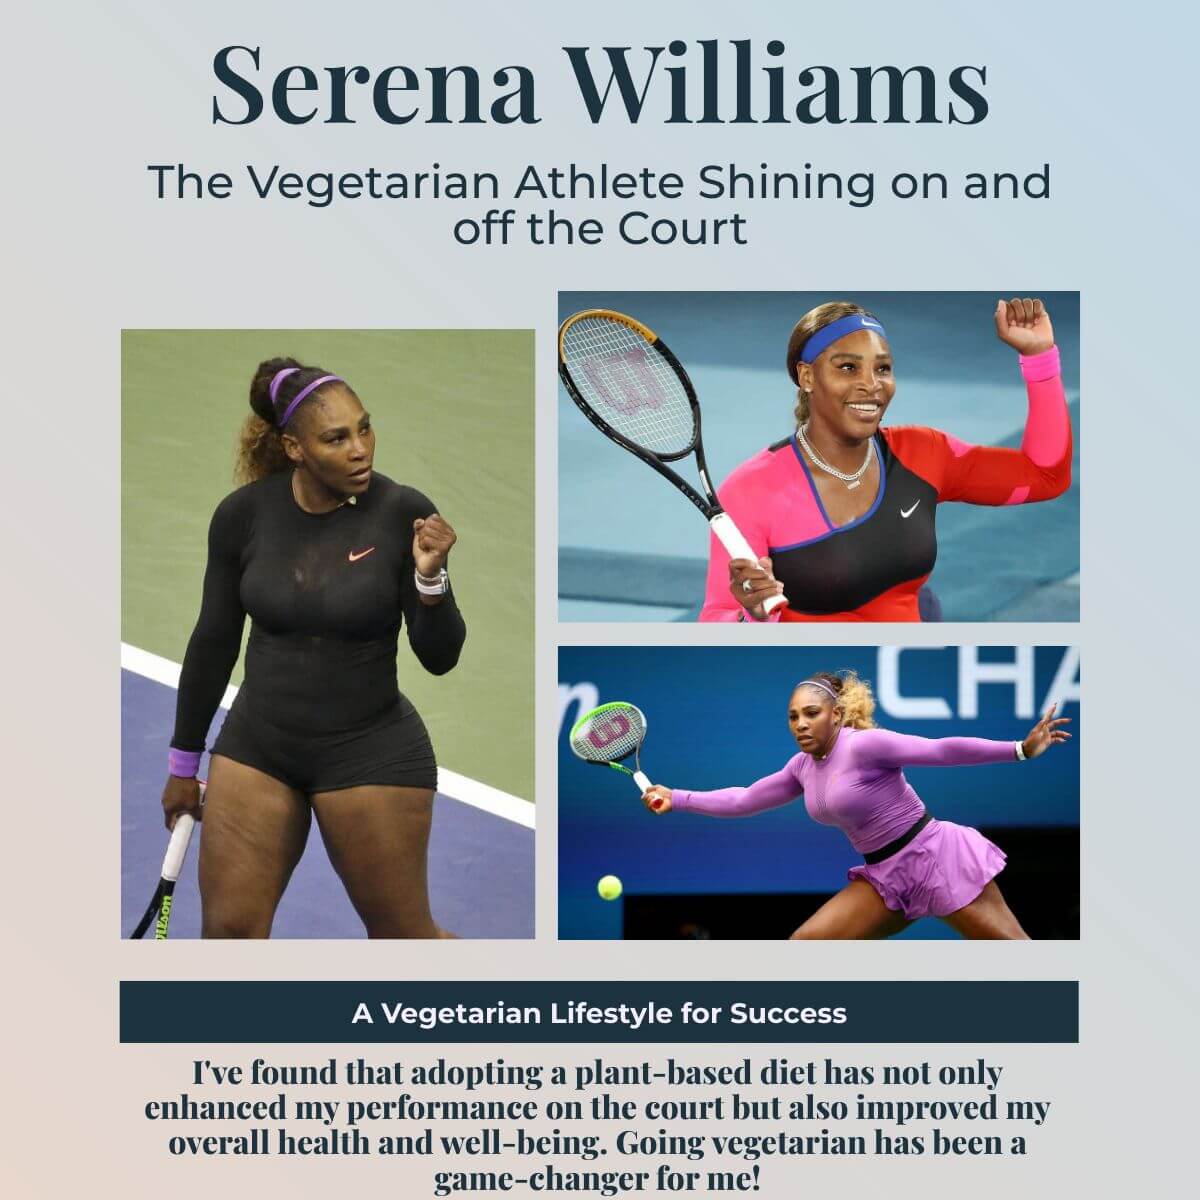 I've found that adopting a plant-based diet has not only enhanced my performance on the court but also improved my overall health and well-being. Going vegetarian has been a game-changer for me!